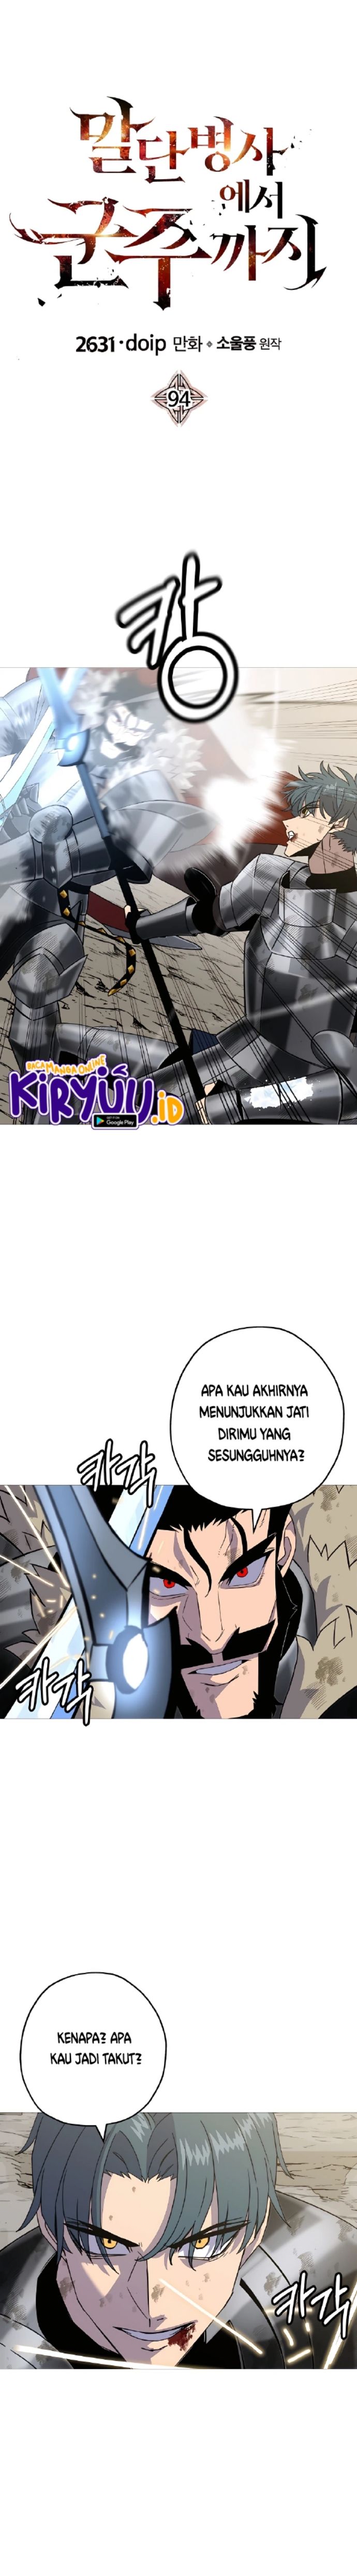 Dilarang COPAS - situs resmi www.mangacanblog.com - Komik the story of a low rank soldier becoming a monarch 094 - chapter 94 95 Indonesia the story of a low rank soldier becoming a monarch 094 - chapter 94 Terbaru 1|Baca Manga Komik Indonesia|Mangacan